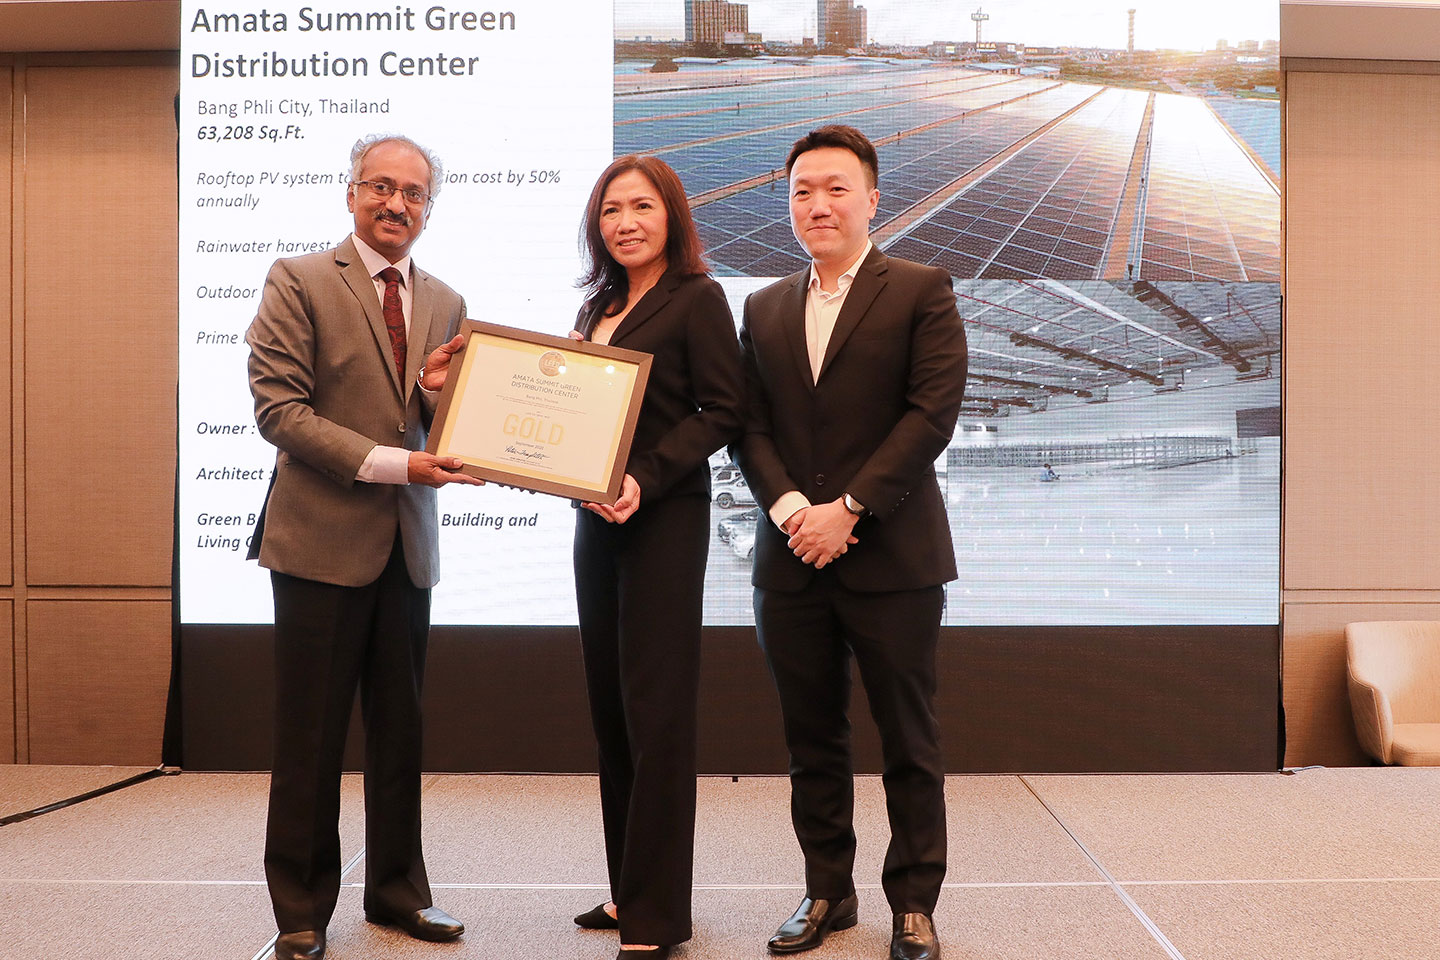 AMATA Summit Green Distribution
Center has achieved LEED Gold certification